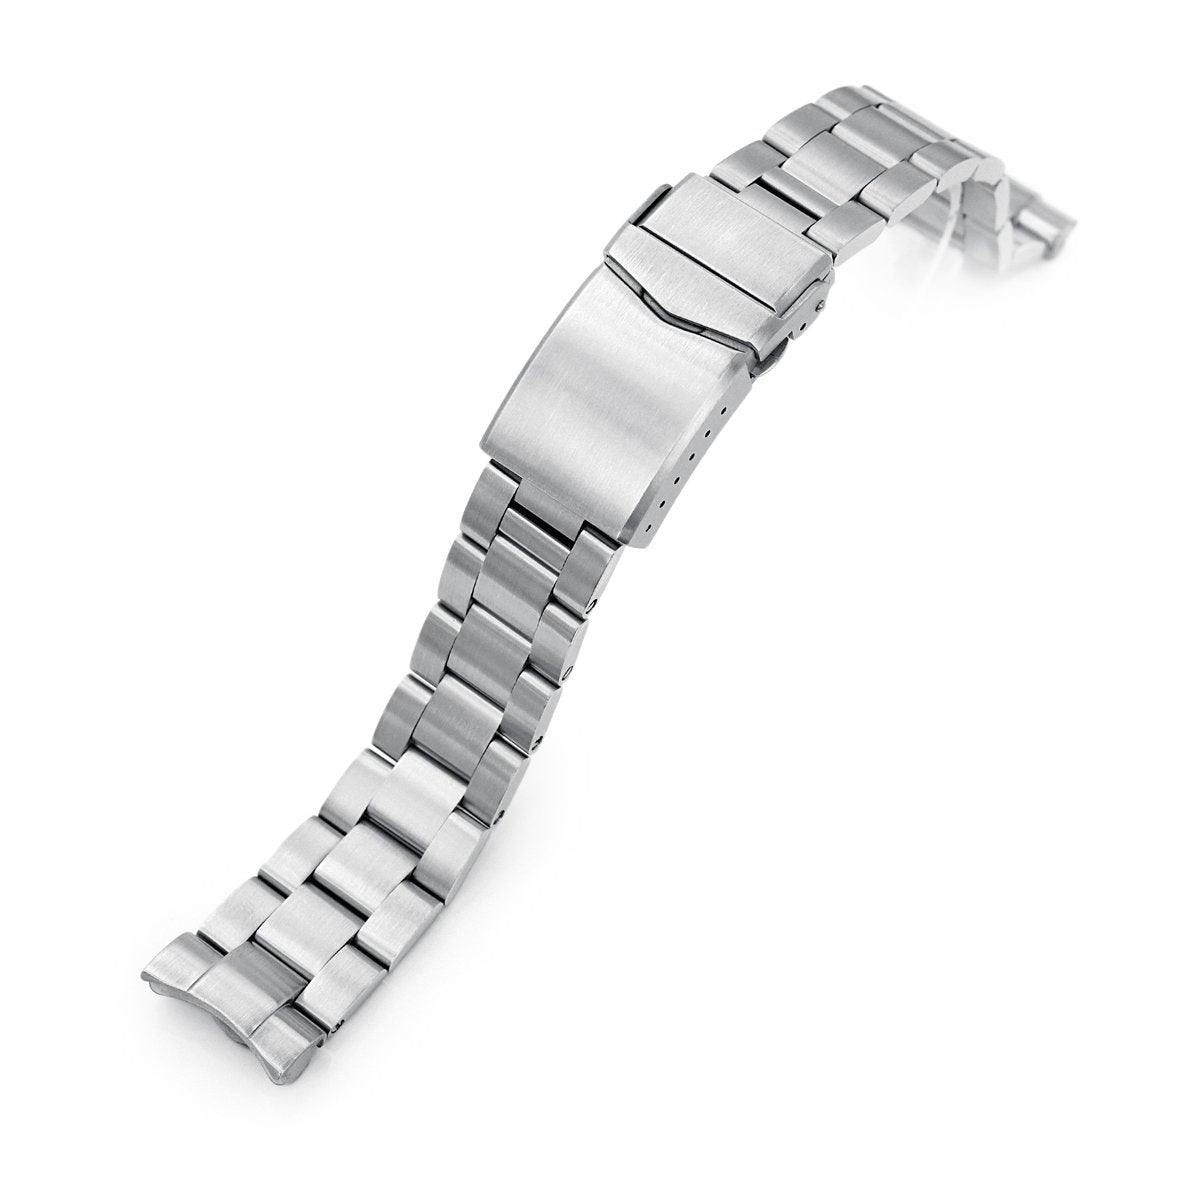 20mm Super-O Boyer 316L Stainless Steel Watch Bracelet for Seiko Mini Turtles SRPC35 V-Clasp Brushed Strapcode Watch Bands